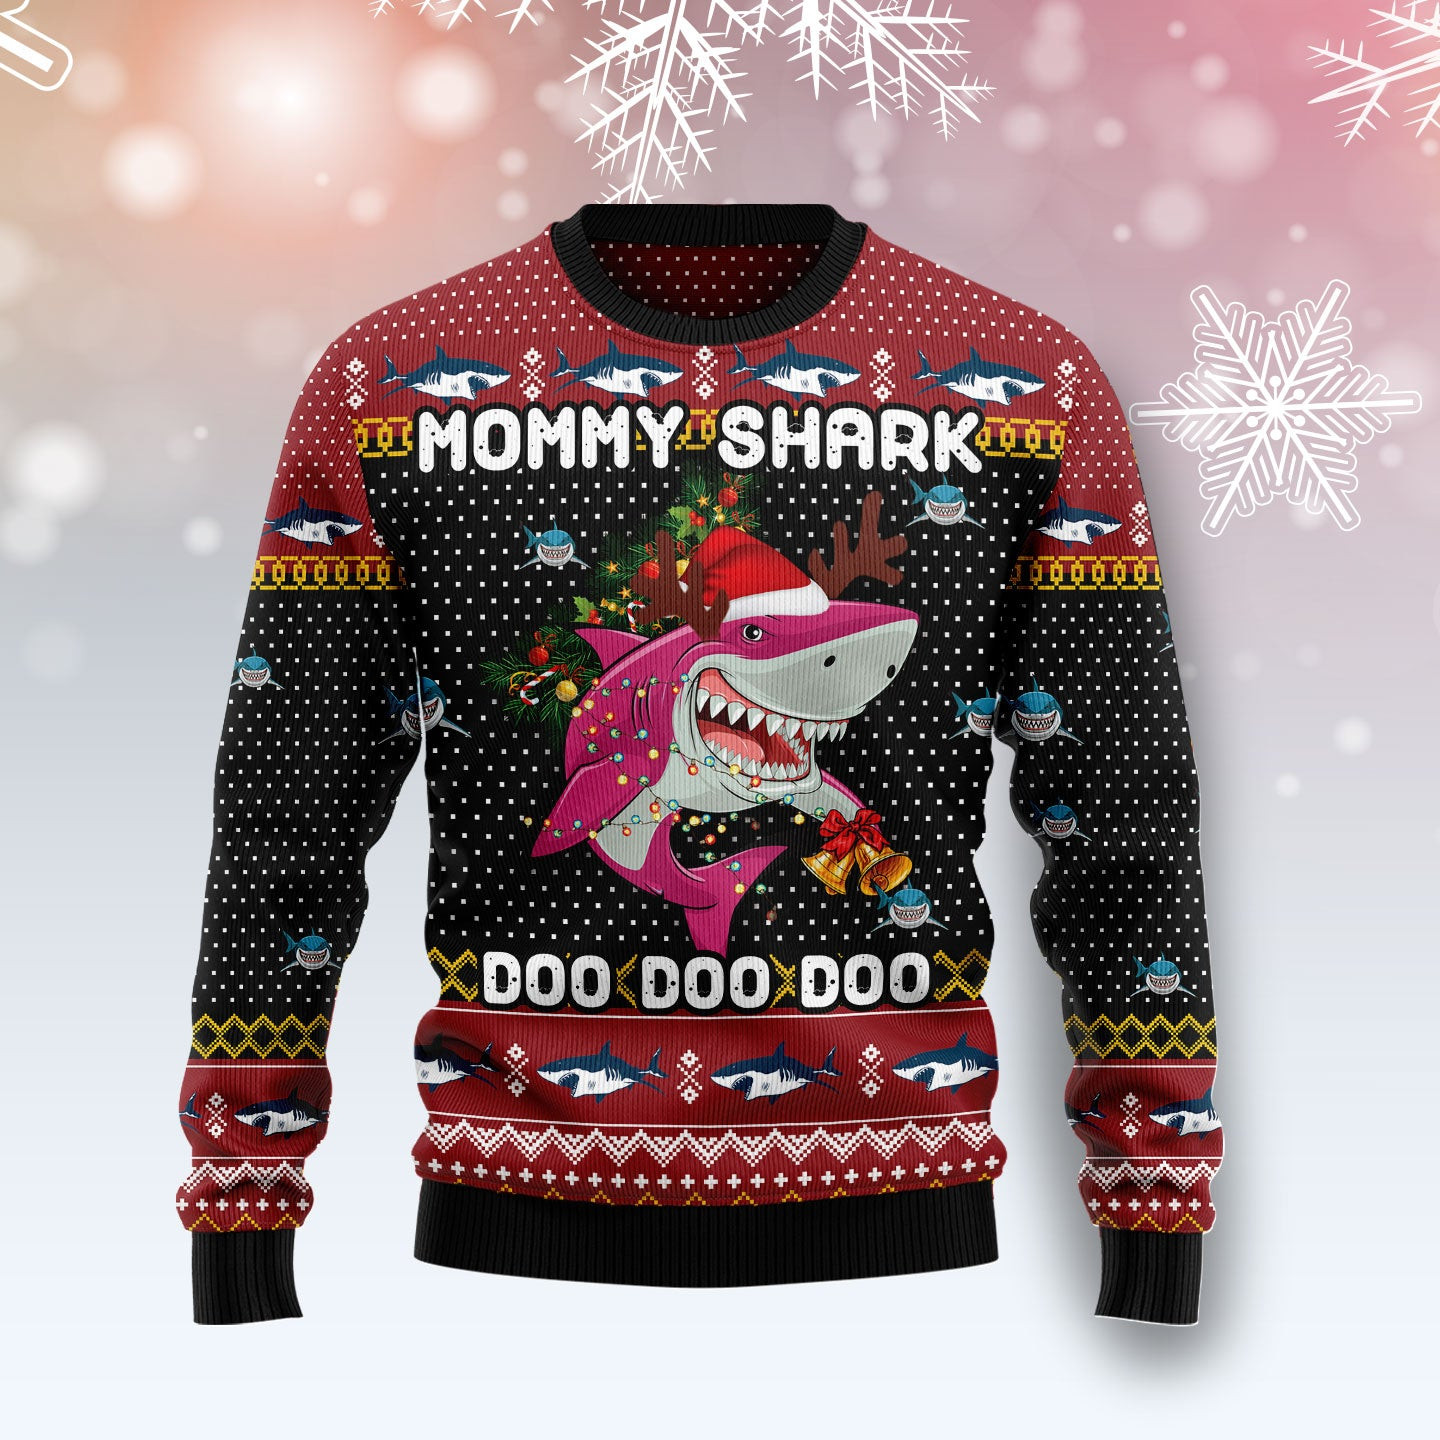 Mommy Shark Christmas Ugly Christmas Sweater, Ugly Sweater For Men Women, Holiday Sweater